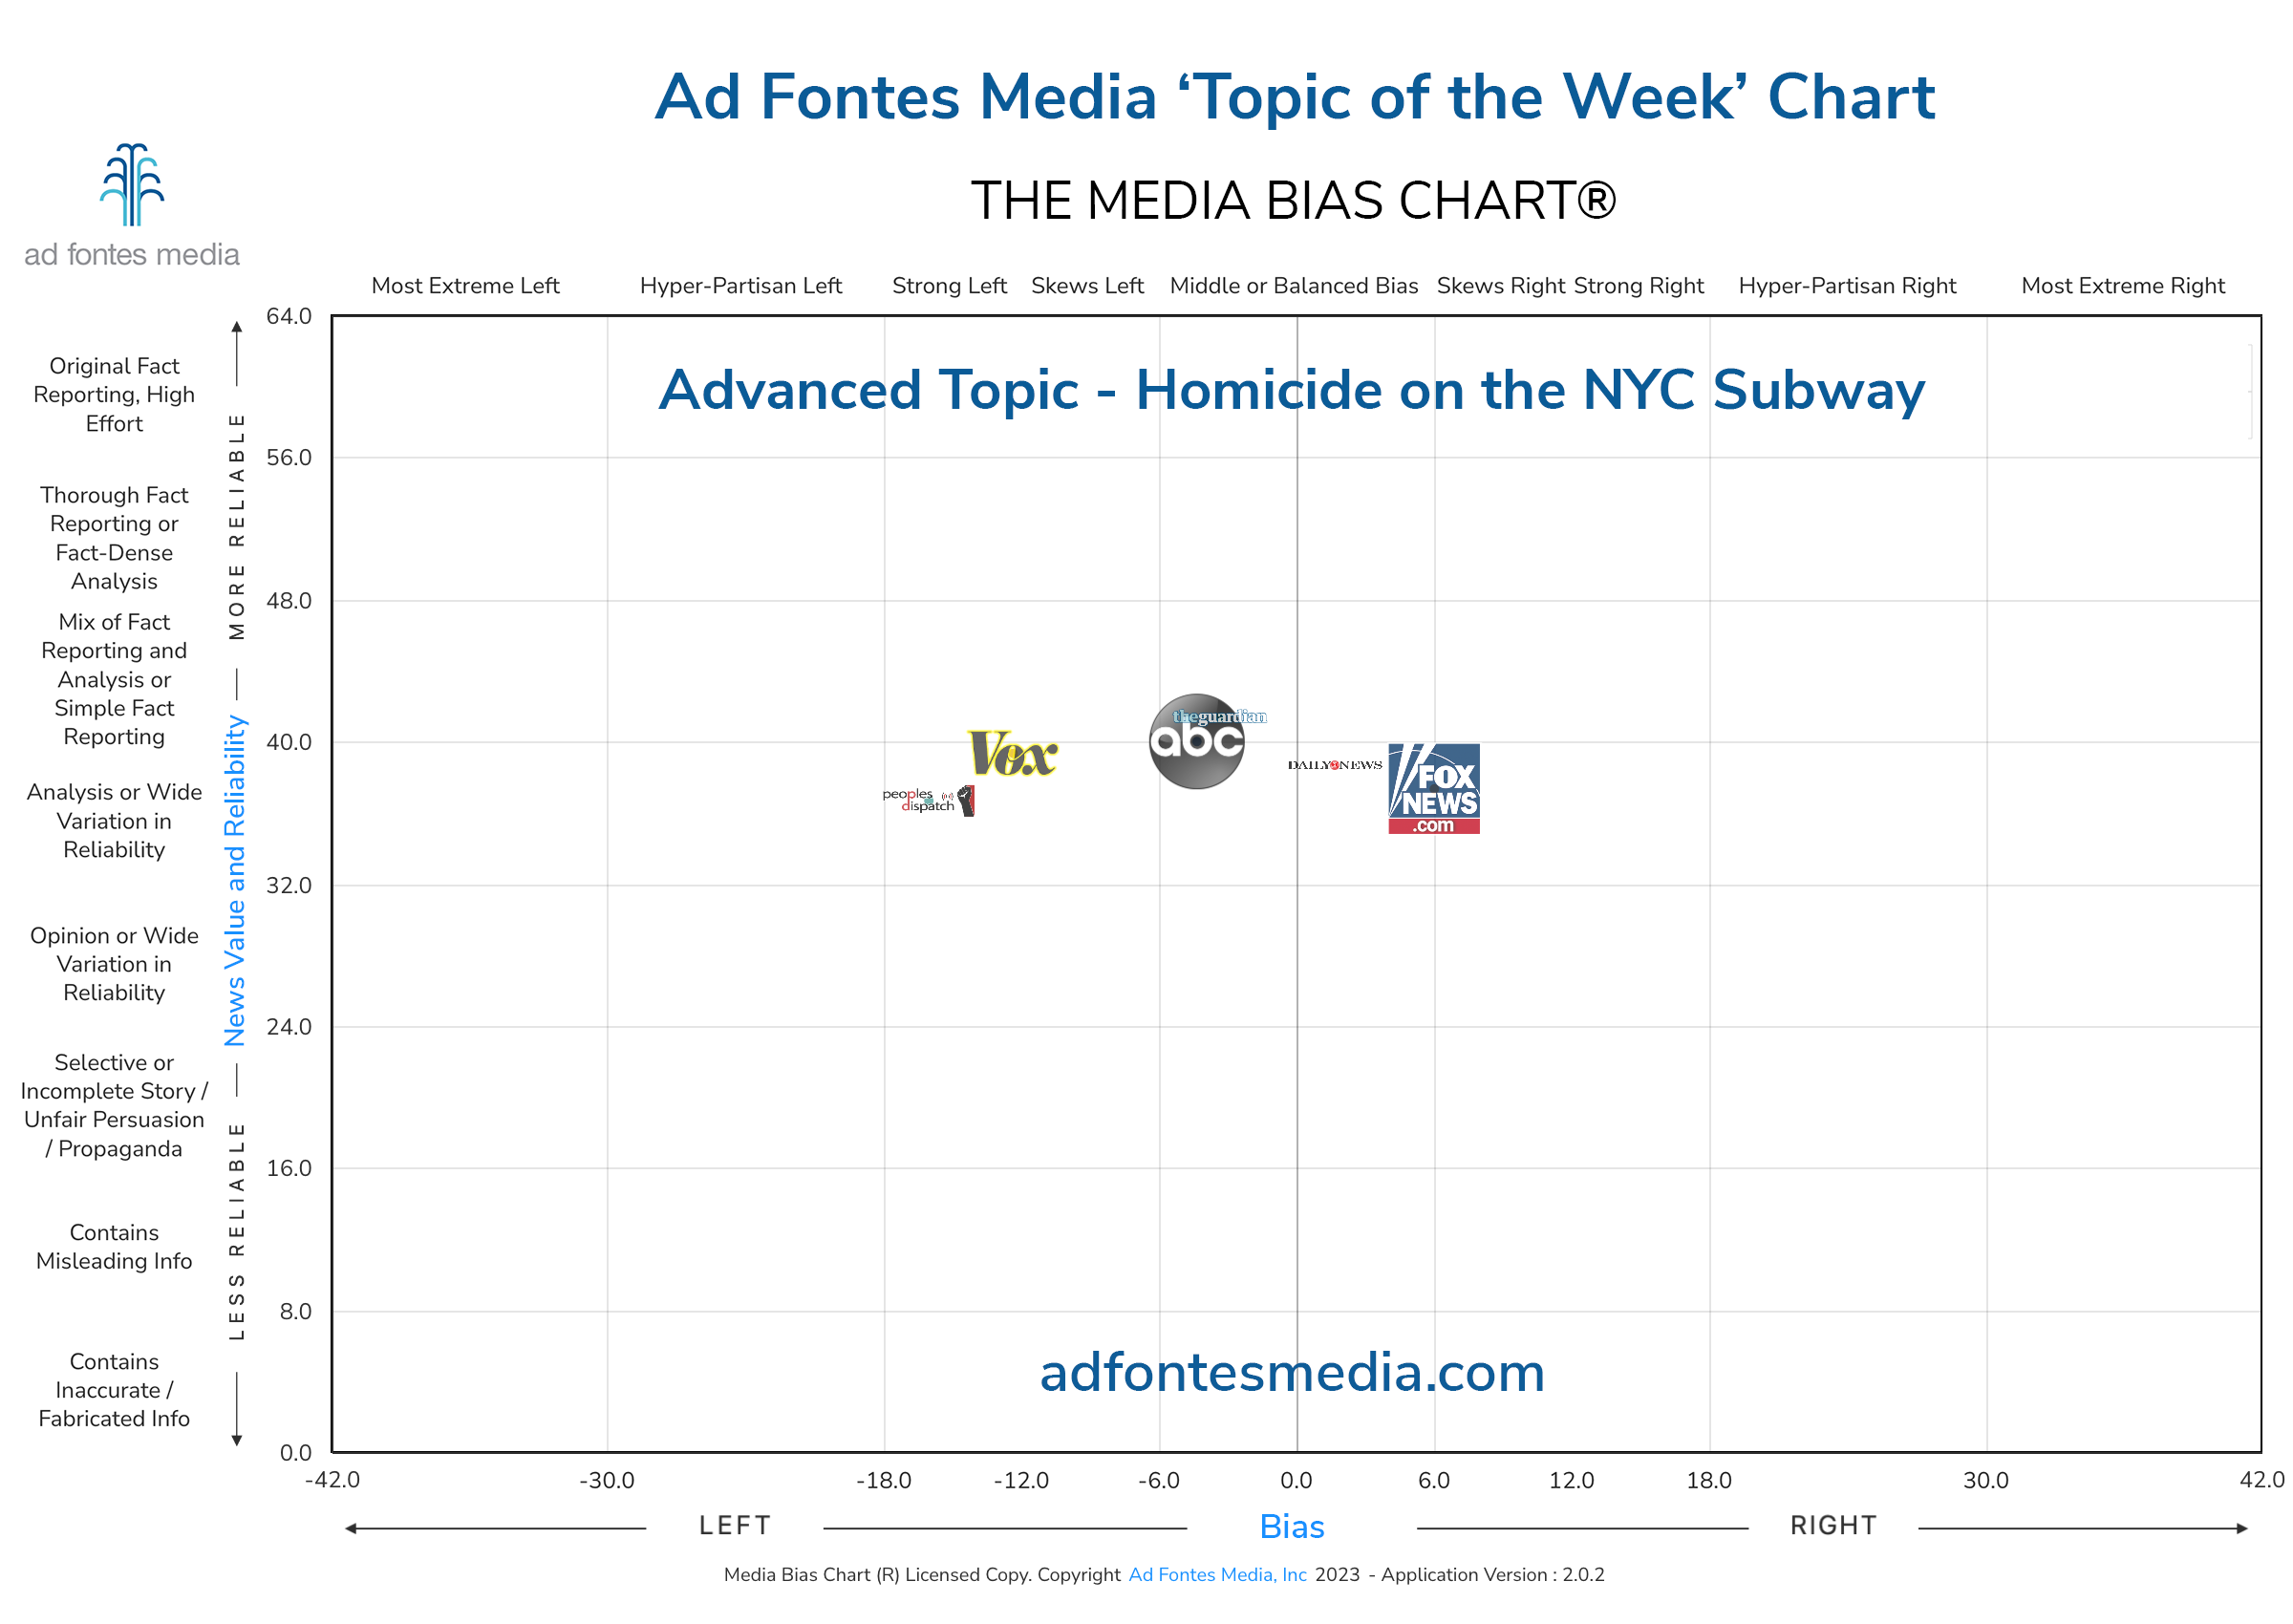 Scores of the Homicide on the NYC Subway articles on the chart